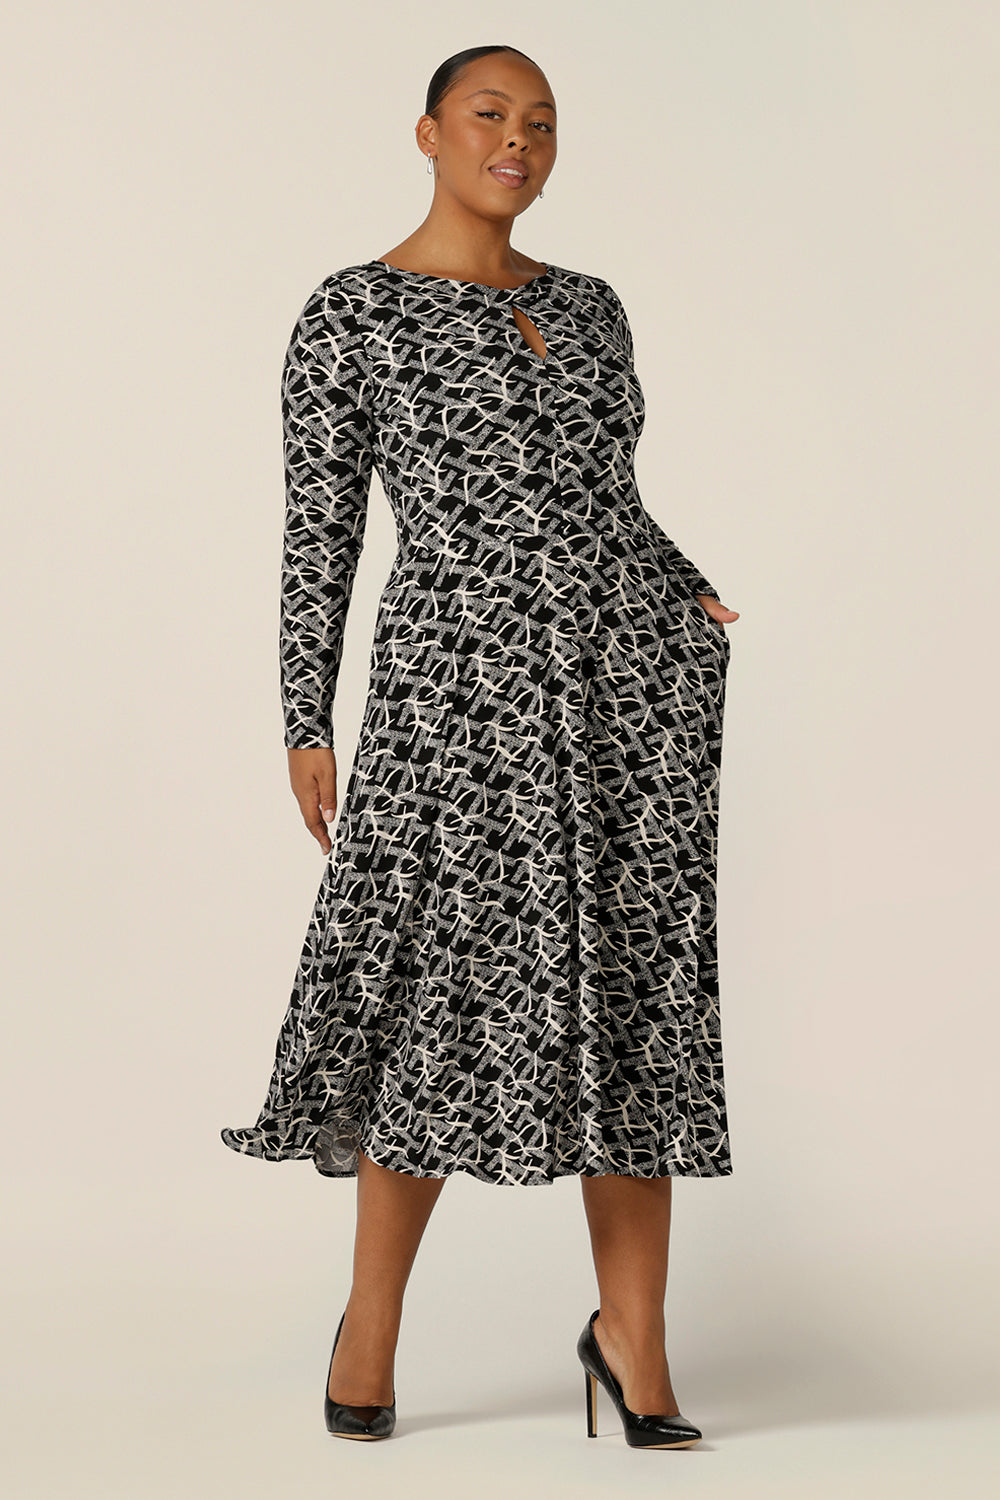 A good dress for plus size, fuller figure women, the Sandee Dress in Thornbirds by Australian and New Zealand women's clothing company L&F is well-fitting in a stretch knit fabric. A midi length, long sleeve dress with twisted keyhole detail, this is an Australian-made dress available to buy in an inclusive size range of 8 to 24.